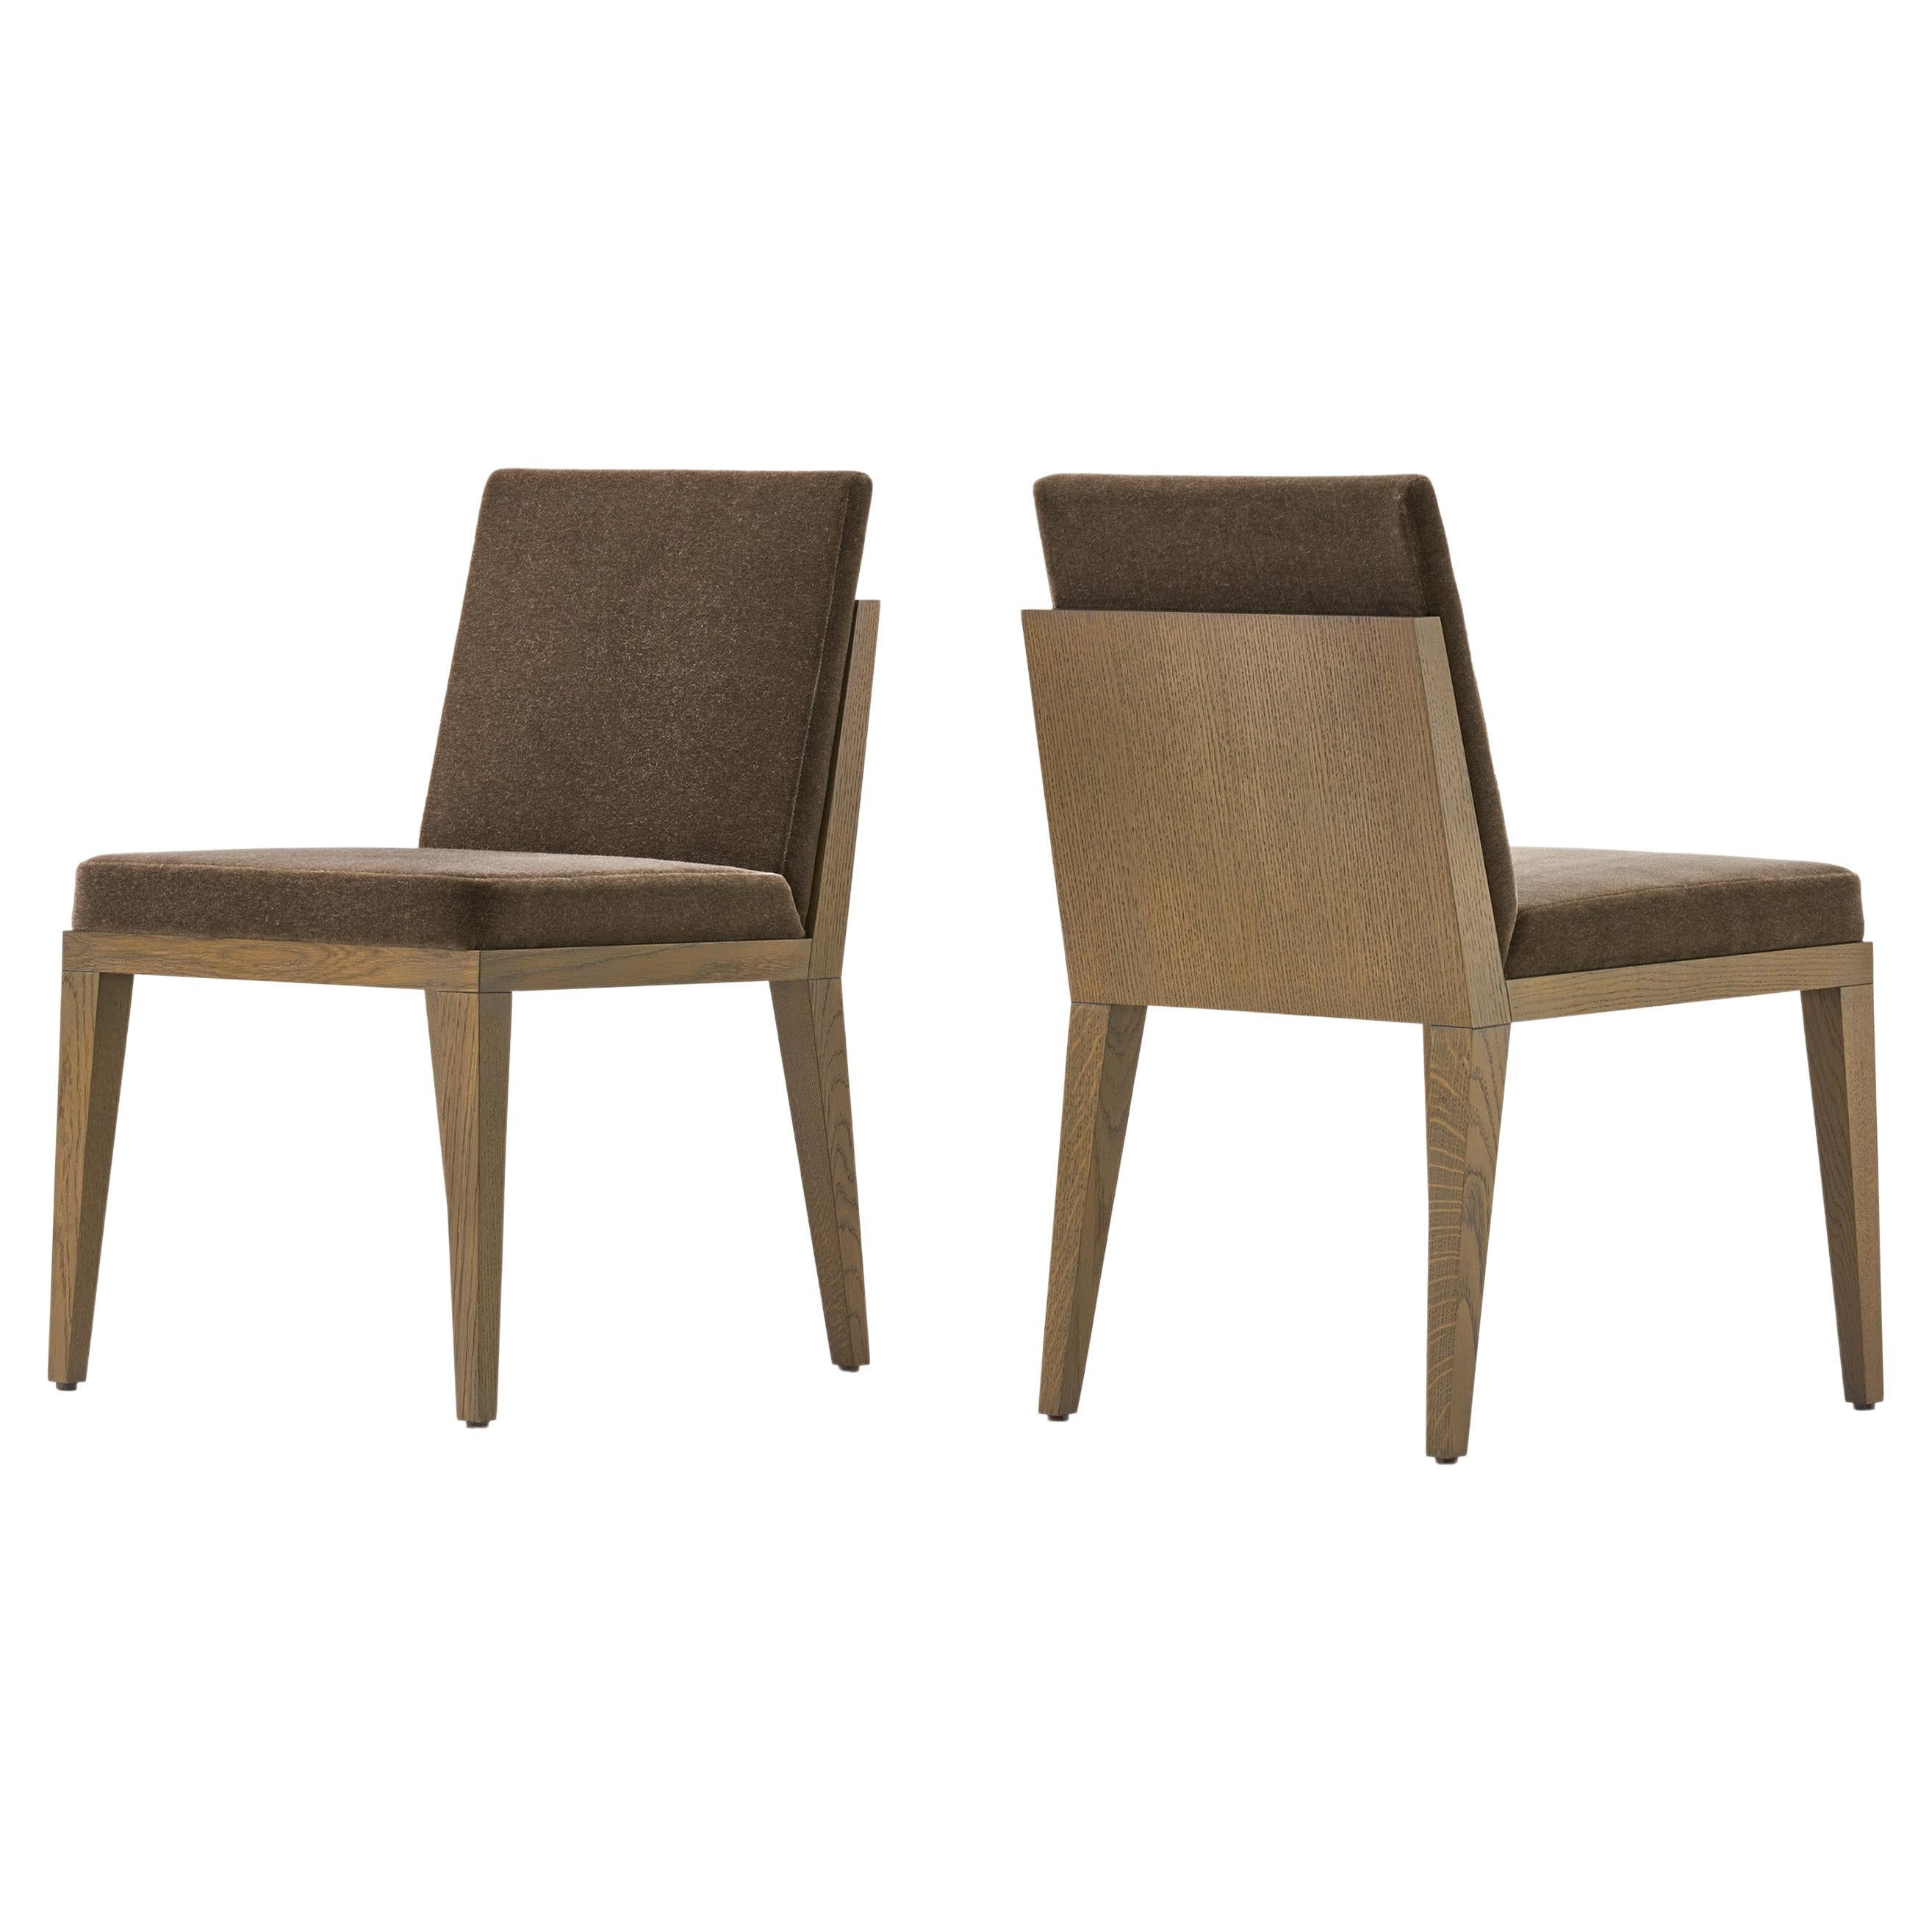 Structured Dining Chair, Upholstered in Mohair